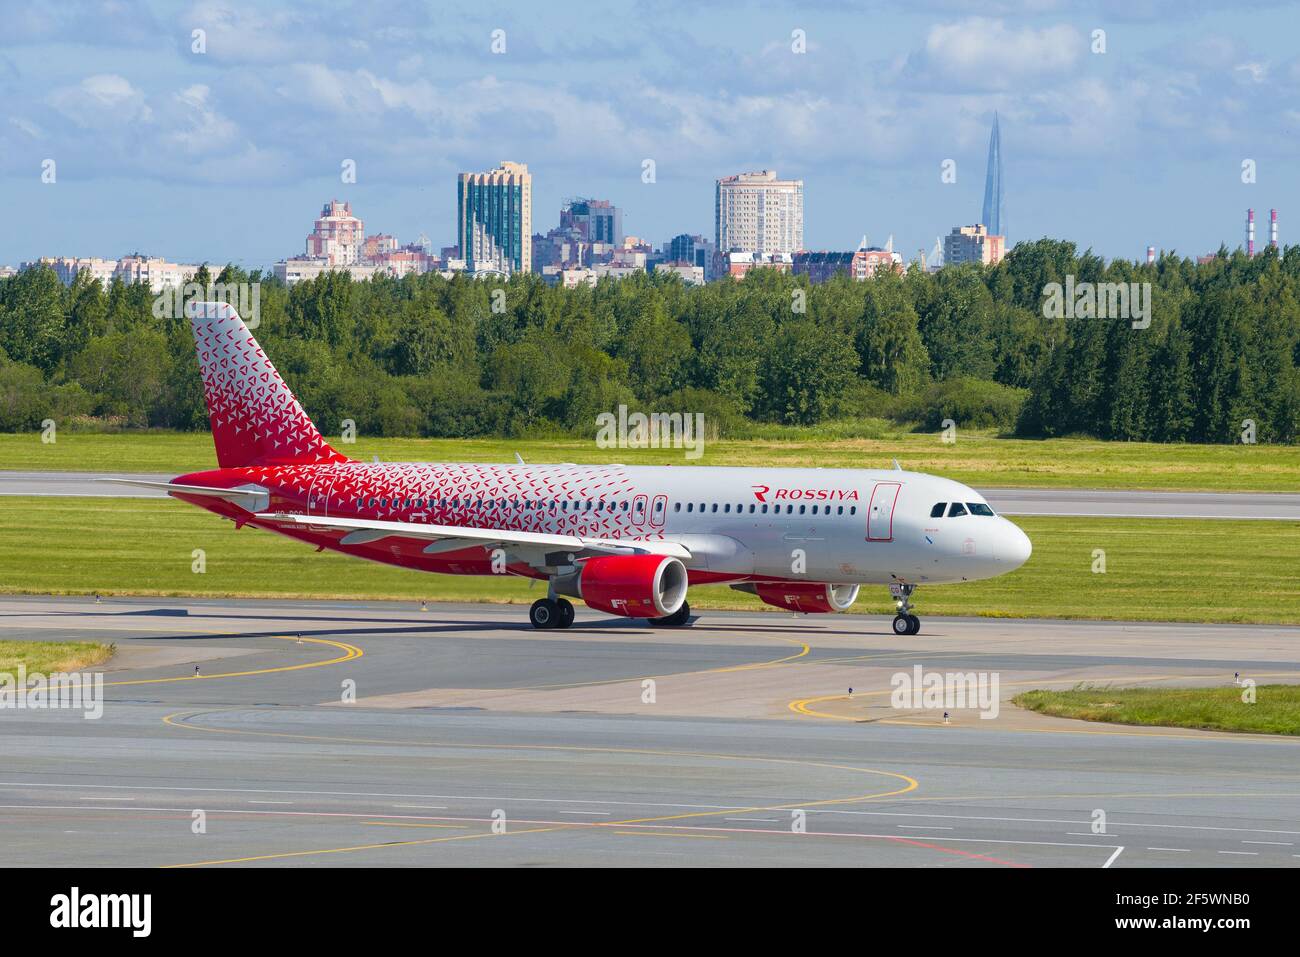 SAINT PETERSBURG, RUSSIA - JUNE 20, 2018: Airplane Airbus A320-200 Kursk (VQ-BCG) of Rossiya Airlines on the taxiway of Pulkovo airport on a sunny Jun Stock Photo